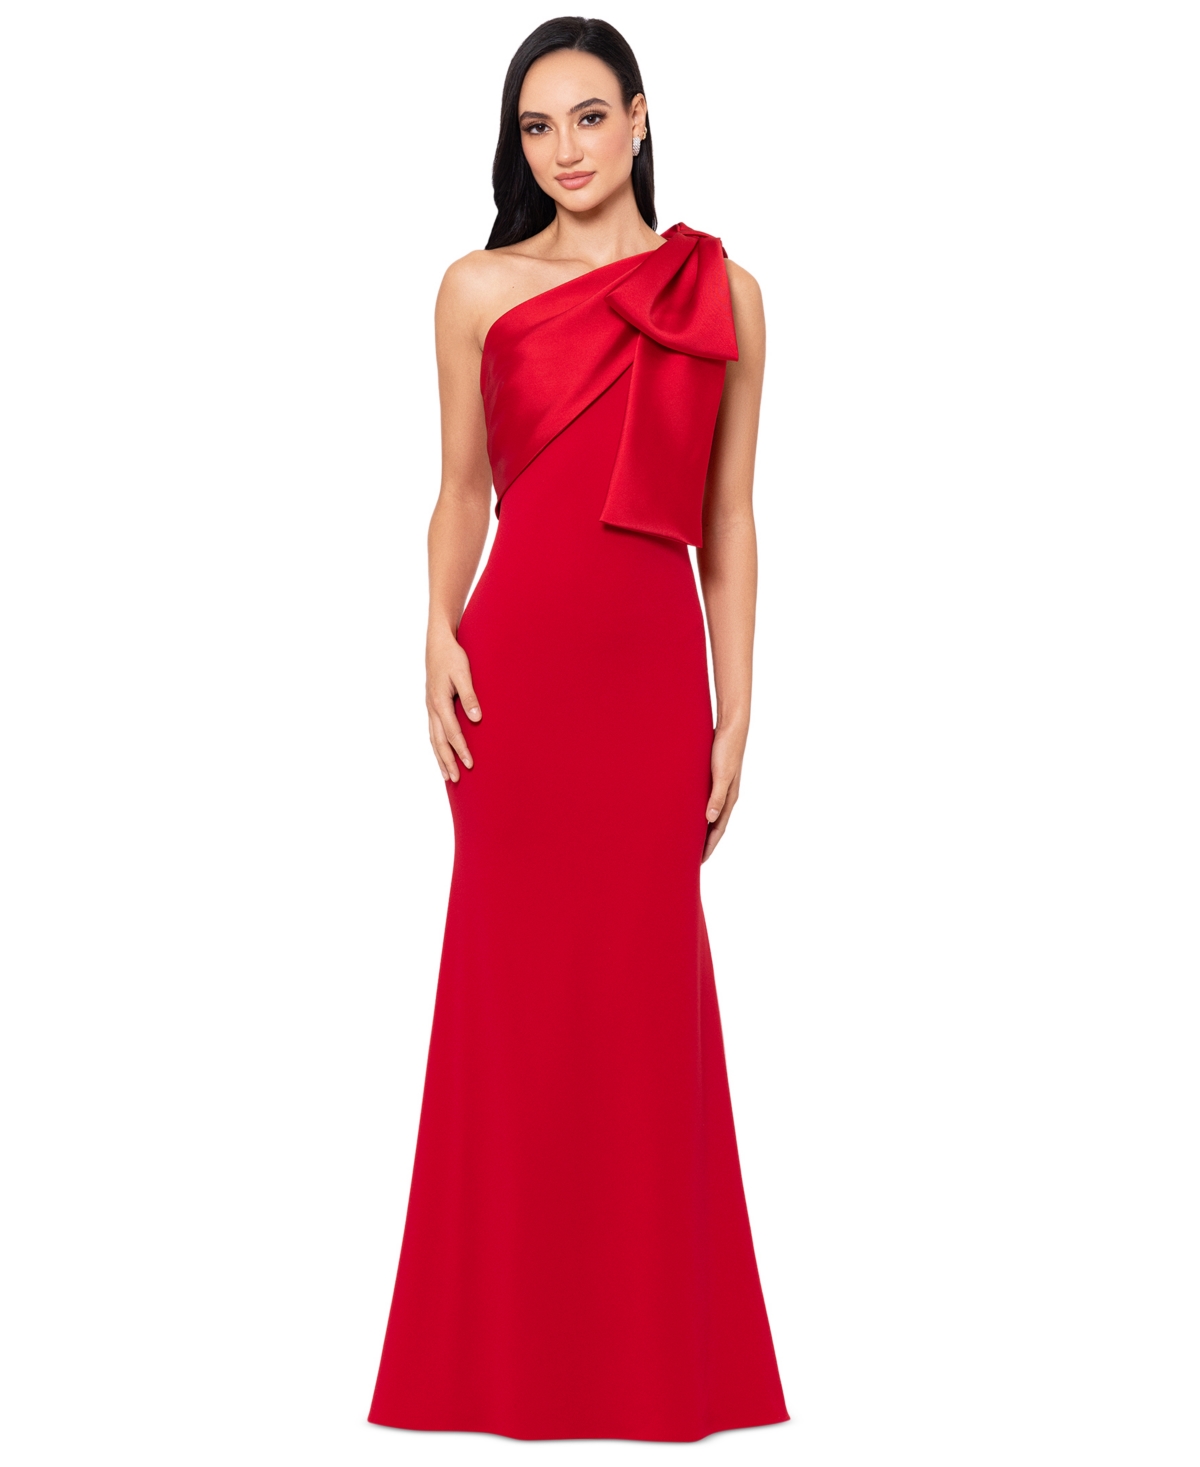 Women's Bow-Trimmed One-Shoulder Gown - Red